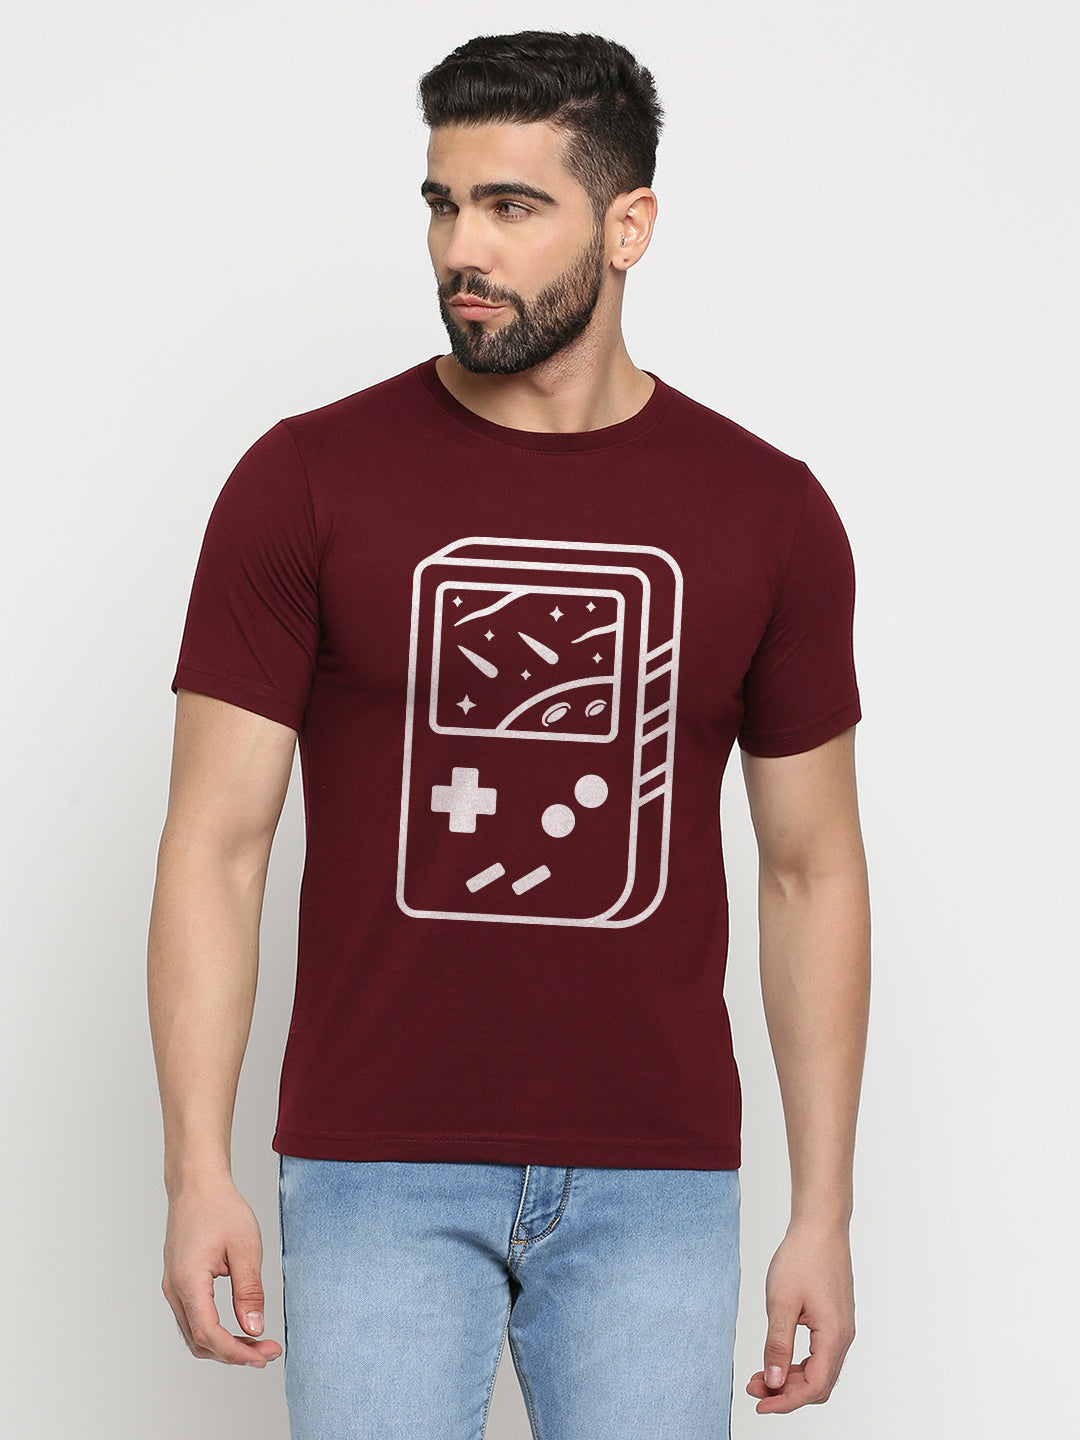 Space Gameboy T-Shirt